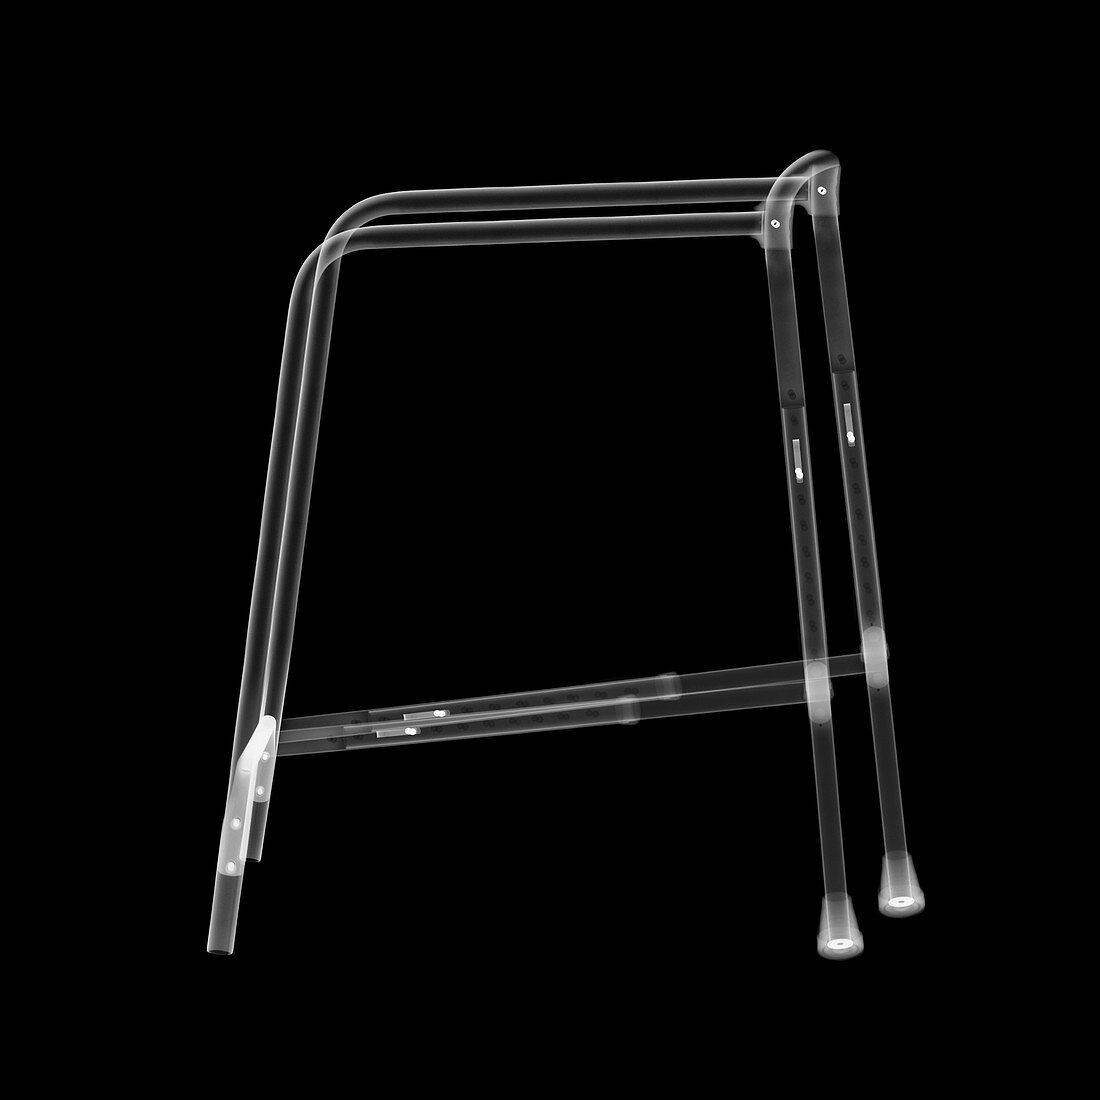 Zimmer frame, X-ray